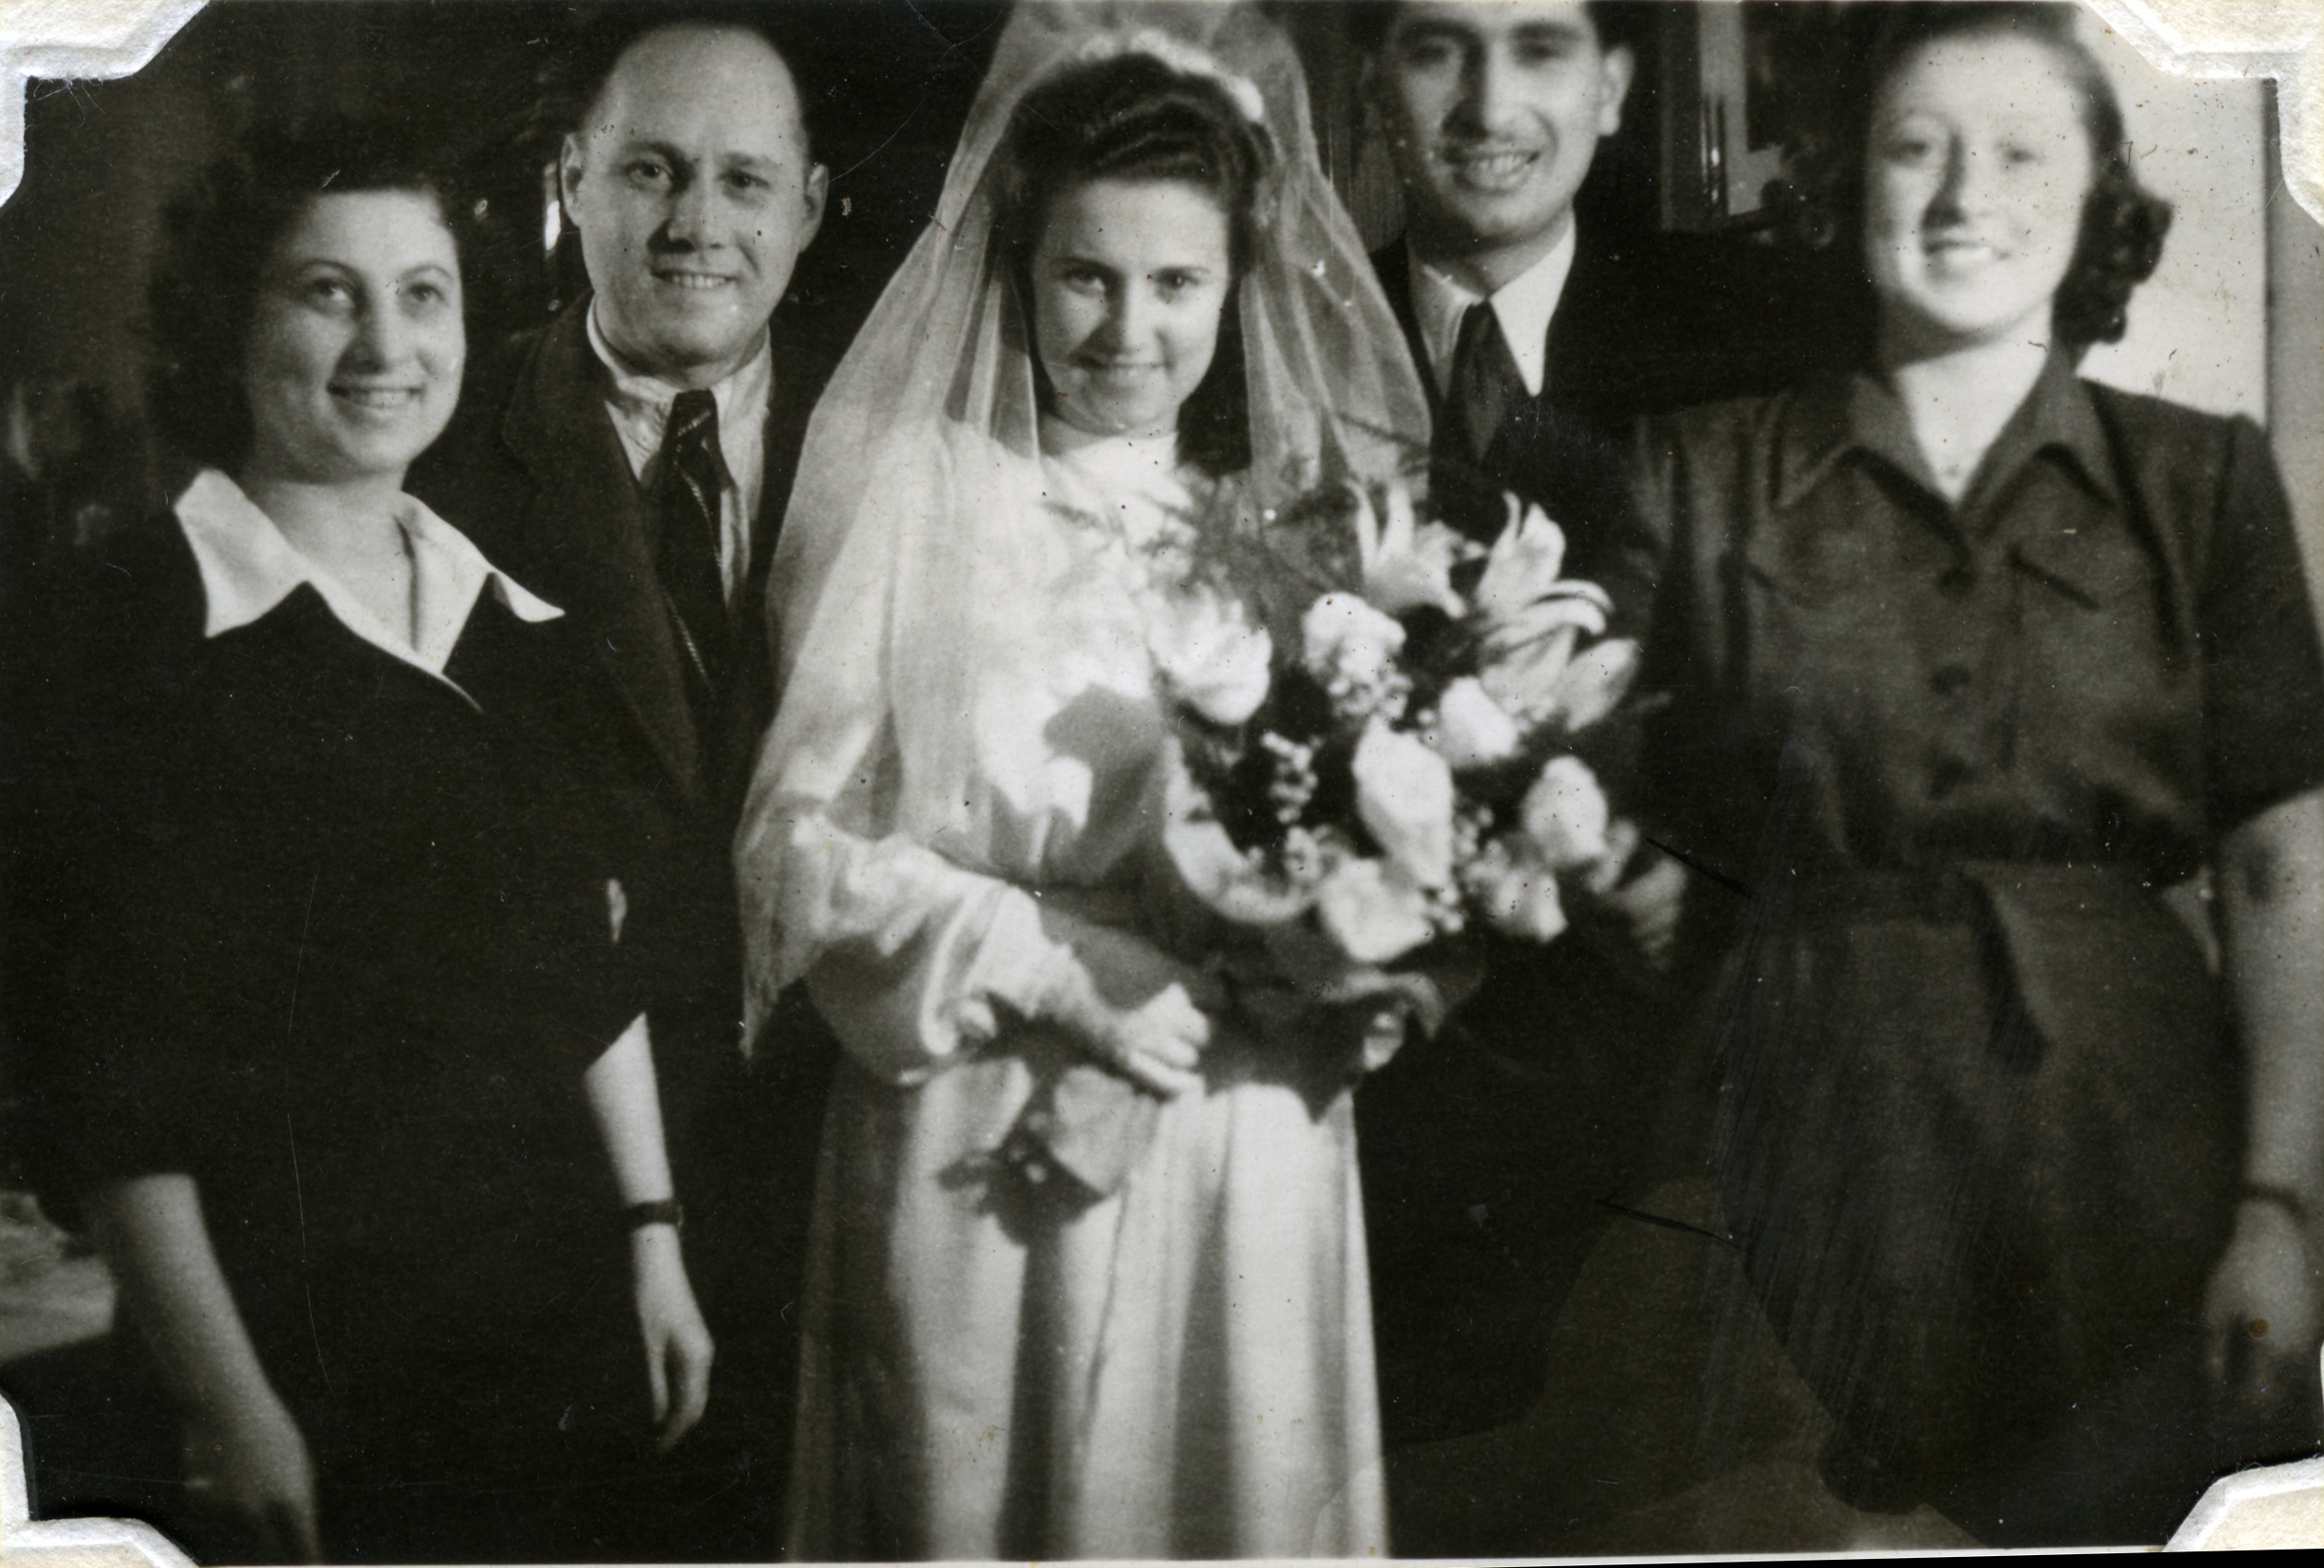 Wedding of Czech Jewish survivors in Podmokly, Czechoslovakia.

Pictured (left to right) are Matilda (nee Scheiner) and her husband Beila, Bella (nee Scheiner) and her husband David Perl, and Manci Scheiner.